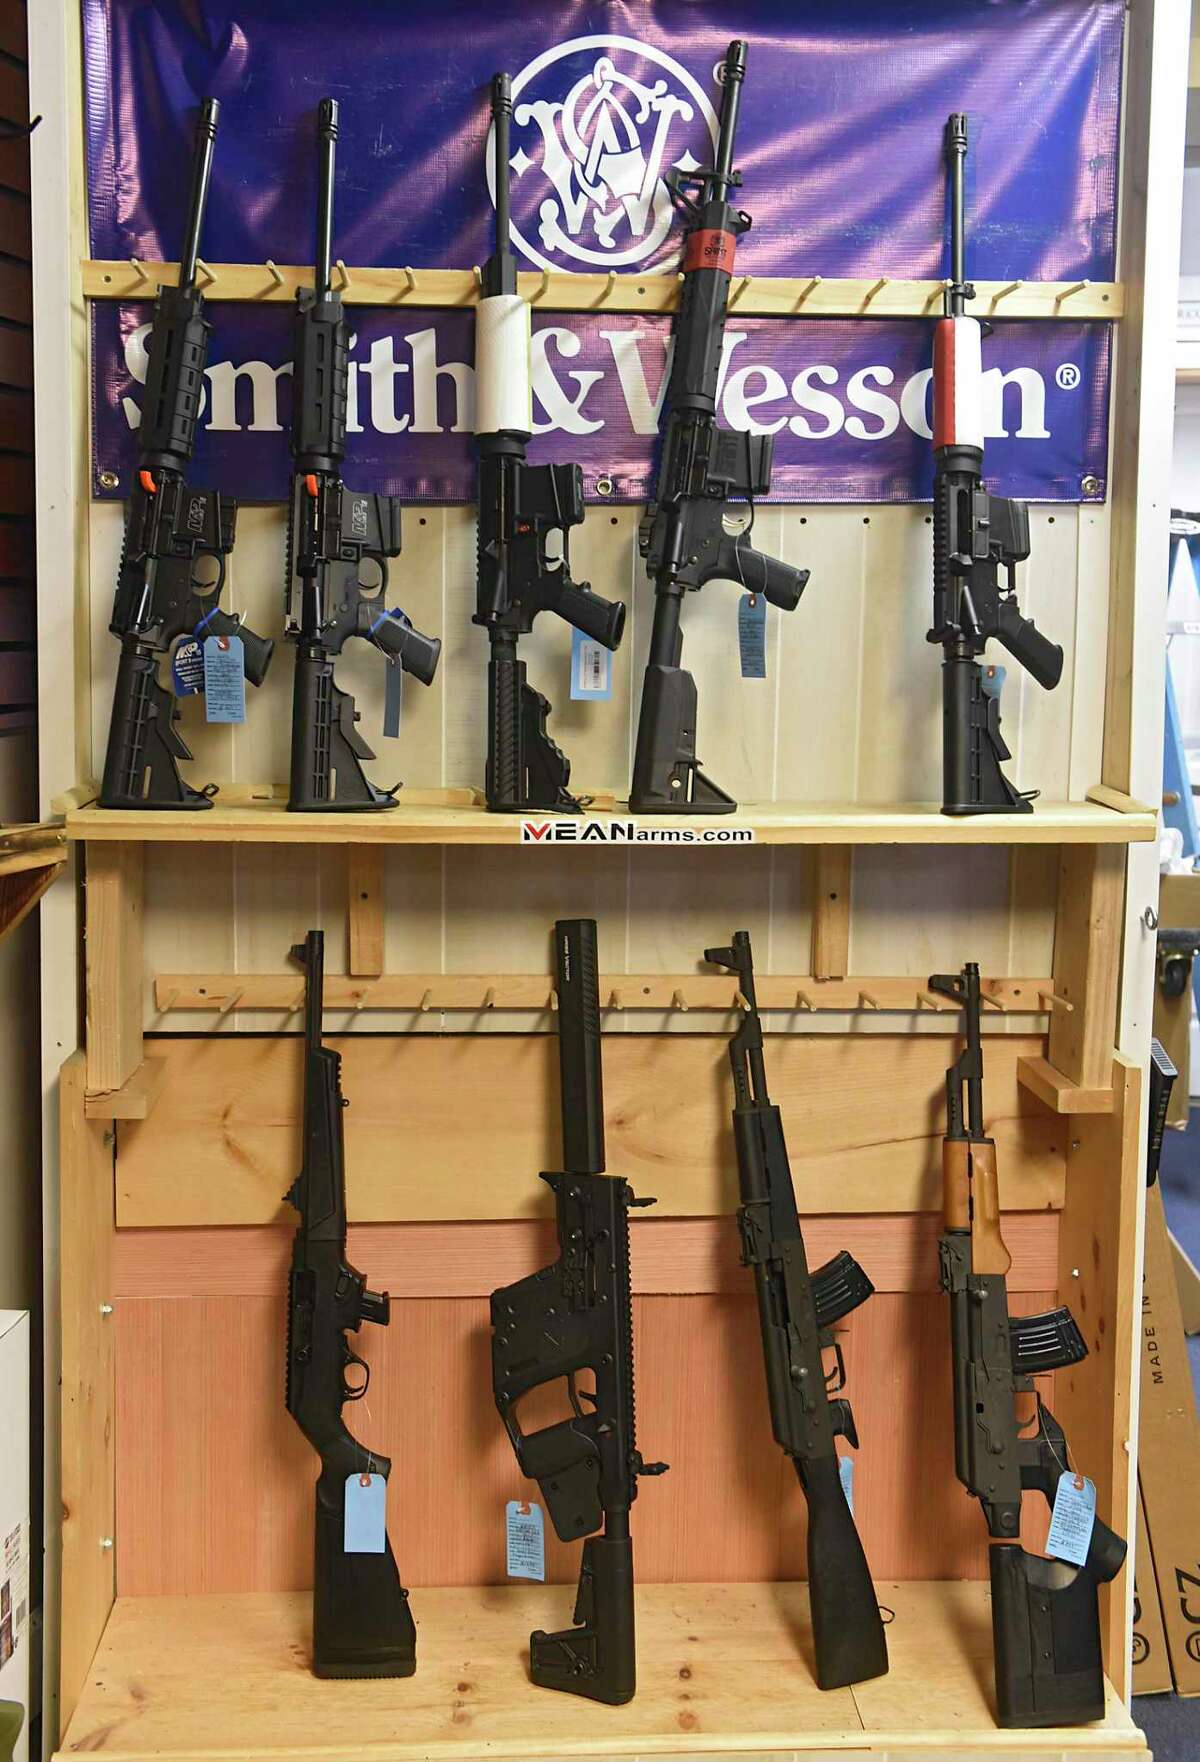 Semi-automatic rifles are seen on display at Upstate Guns & Ammo store on Thursday, March 19, 2020 in Schenectatdy, N.Y. (Lori Van Buren/Times Union)